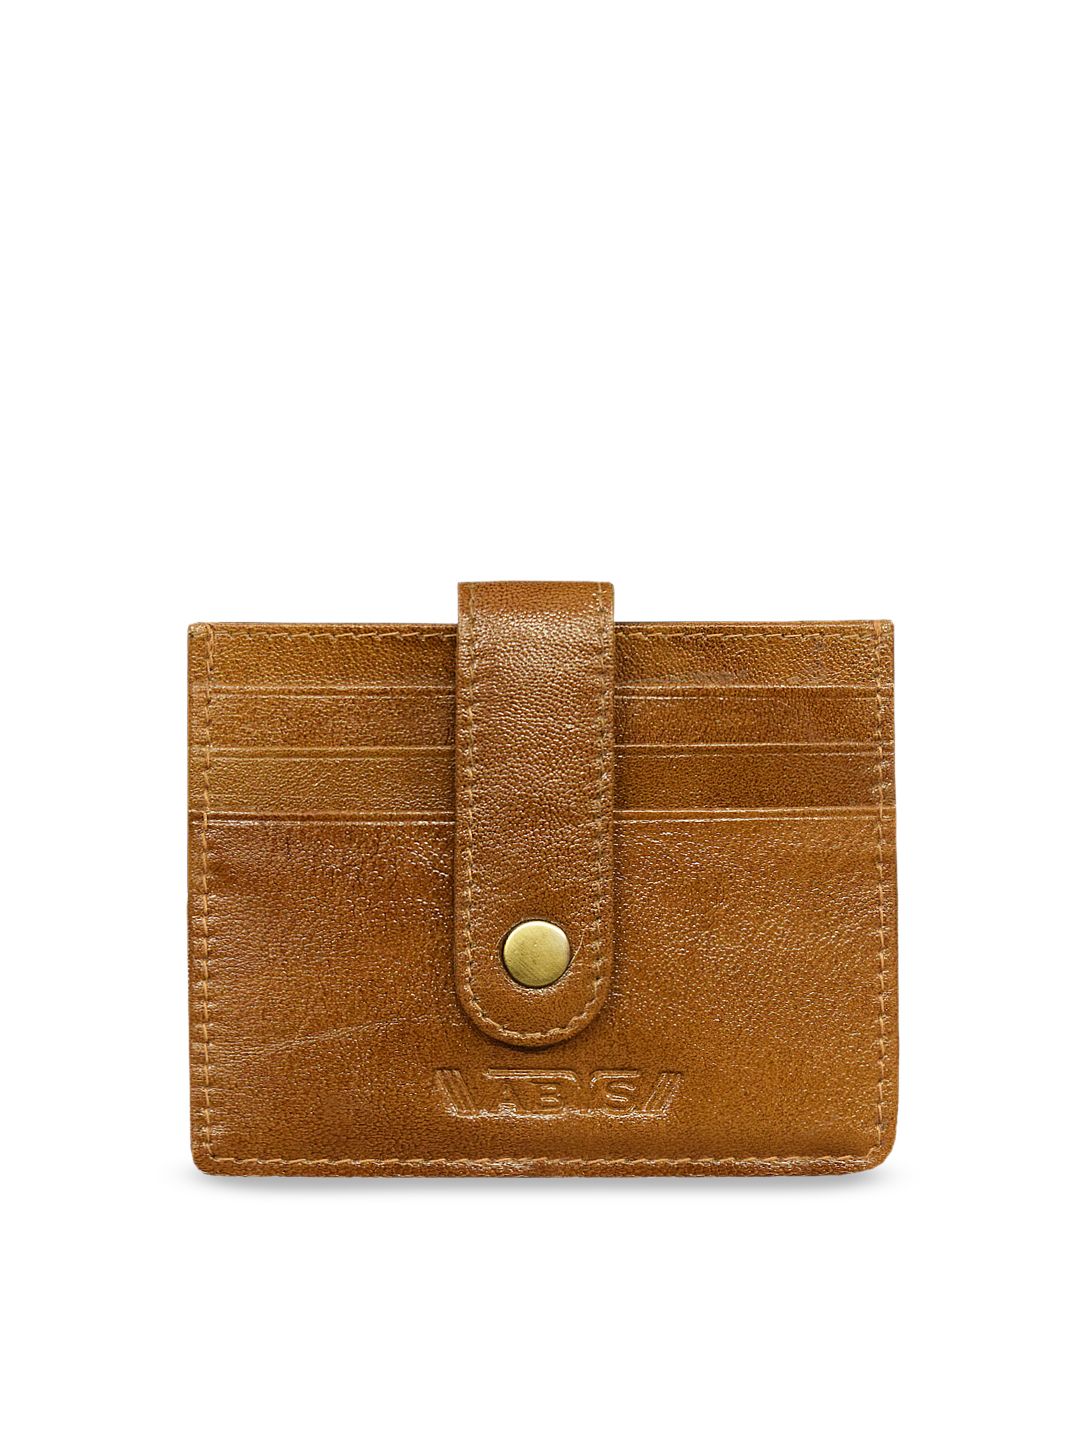 ABYS Unisex Tan Brown Solid Leather Card Holder Price in India